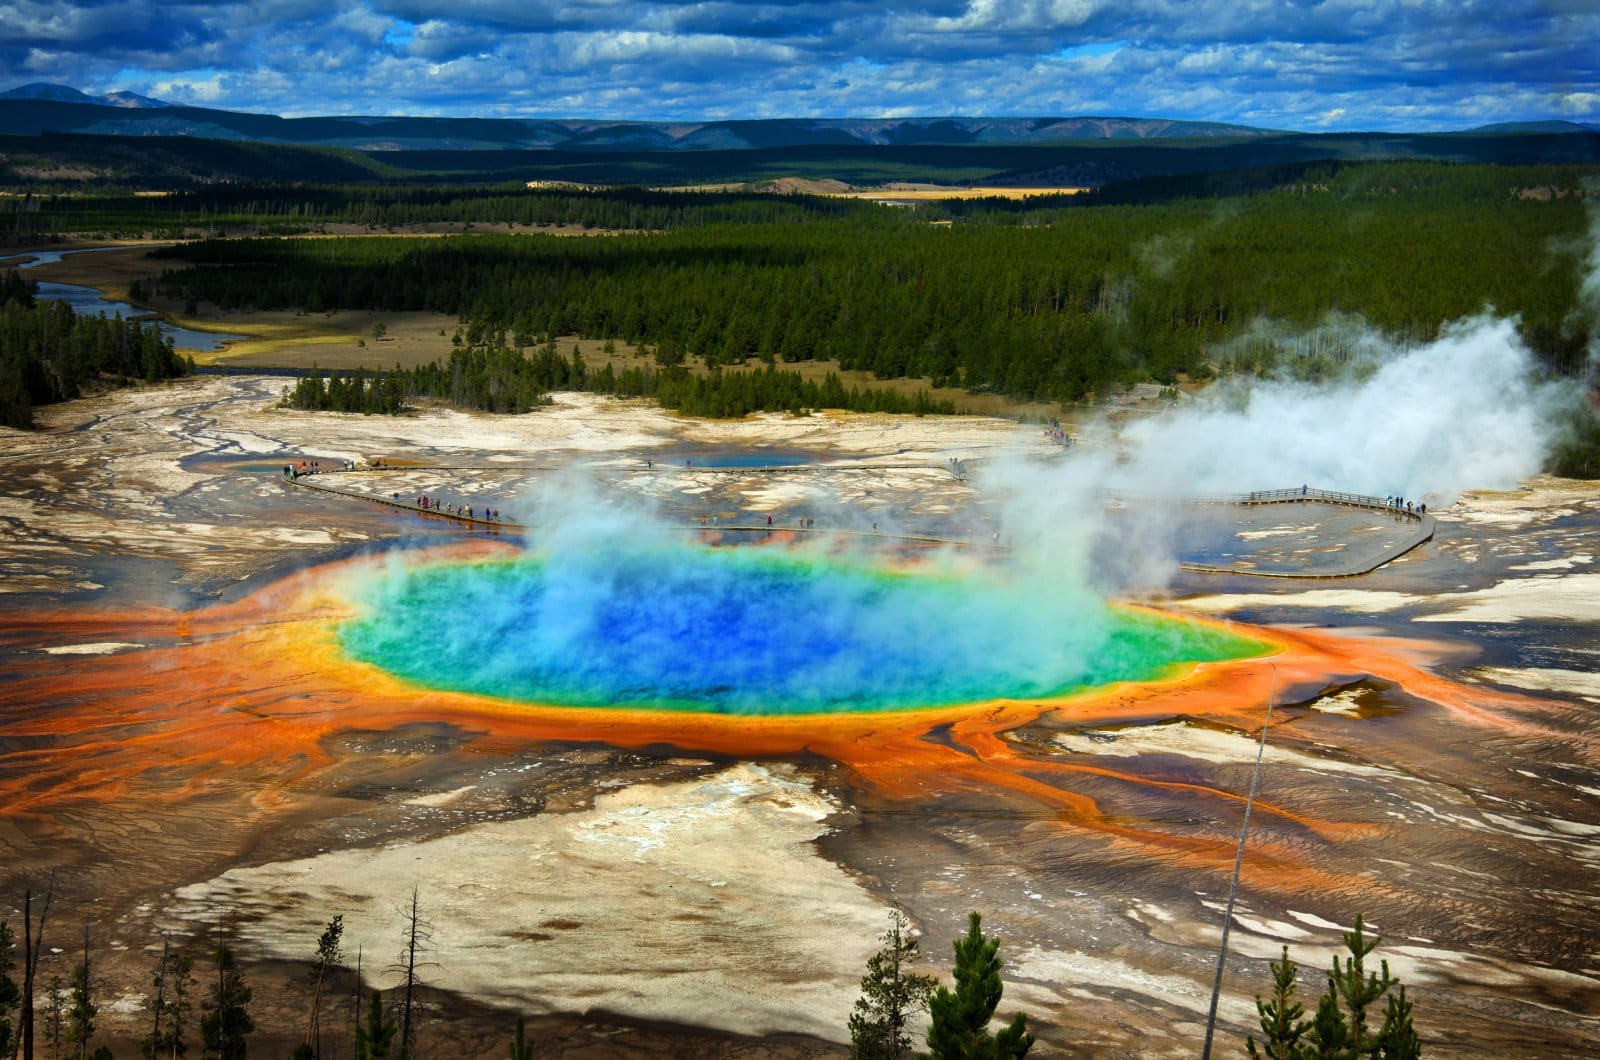 Image Credit: Shutterstock / Lane V. Erickson <p><span>Immerse yourself in geysers, wildlife, and vast landscapes. It’s a nature lover’s paradise but be cautious of wildlife and stay on designated paths.</span></p>